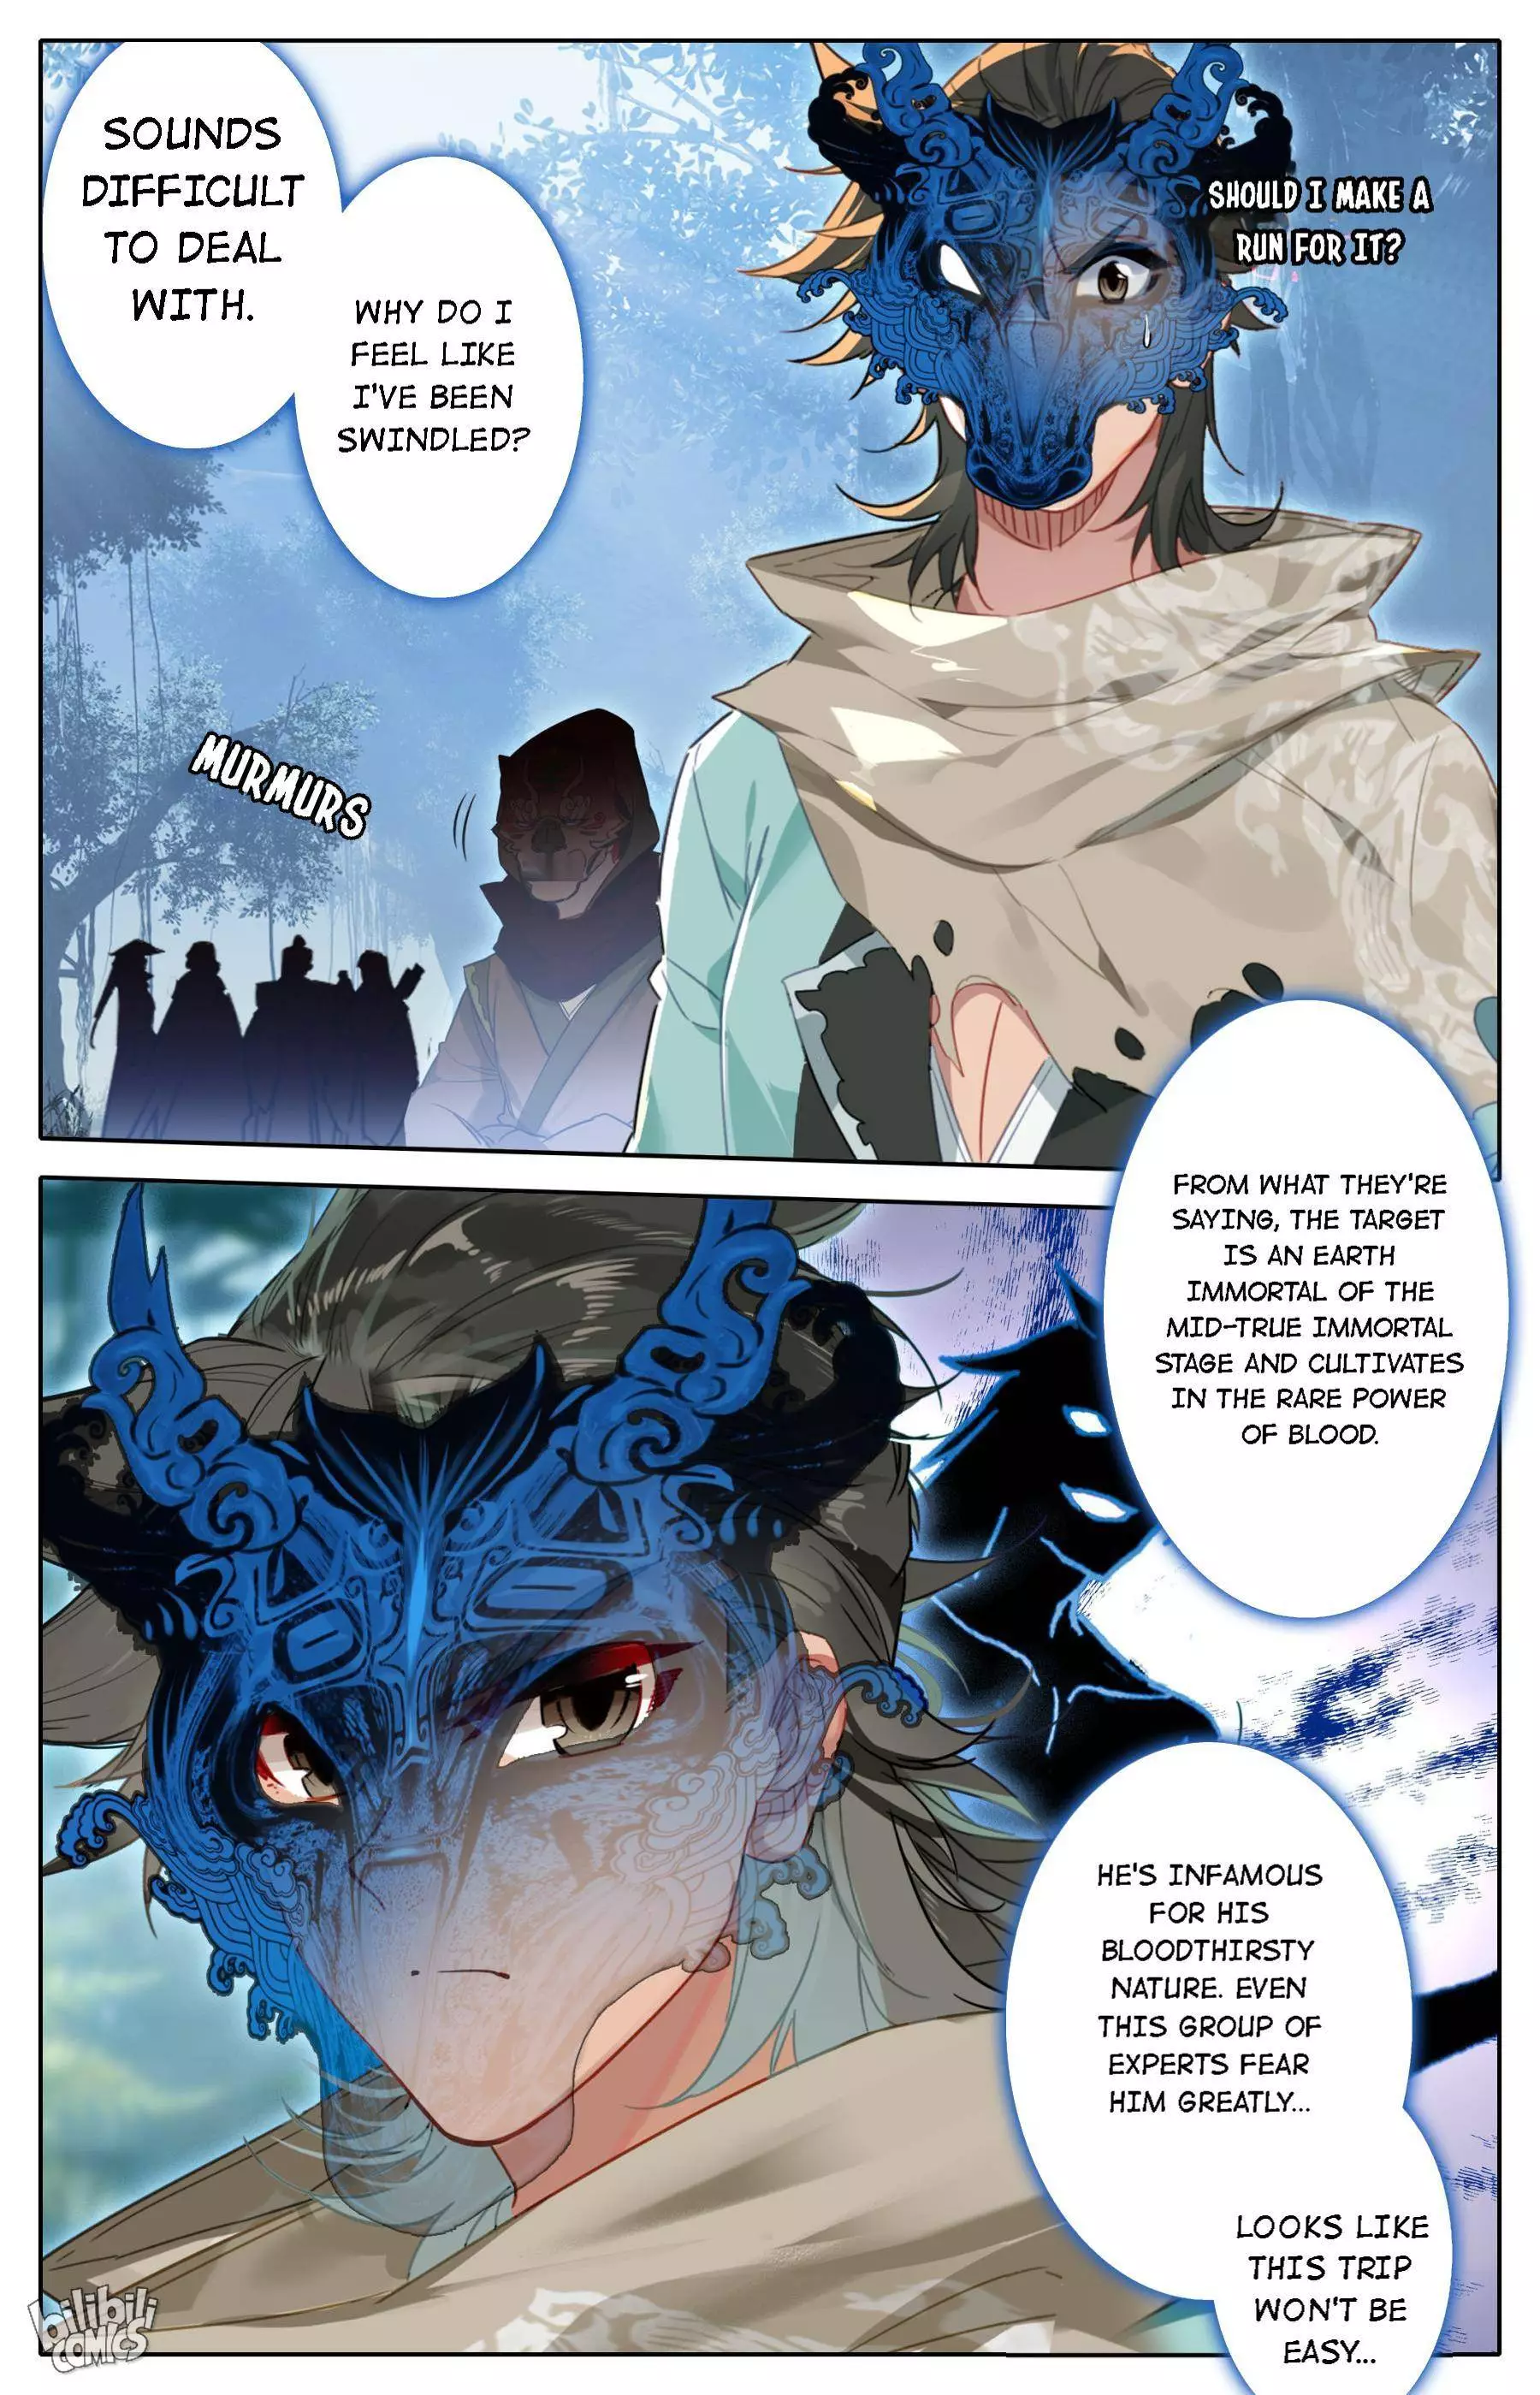 A Record Of A Mortal's Journey To Immortality—Immortal World Arc - 107 page 4-0df0f1c5